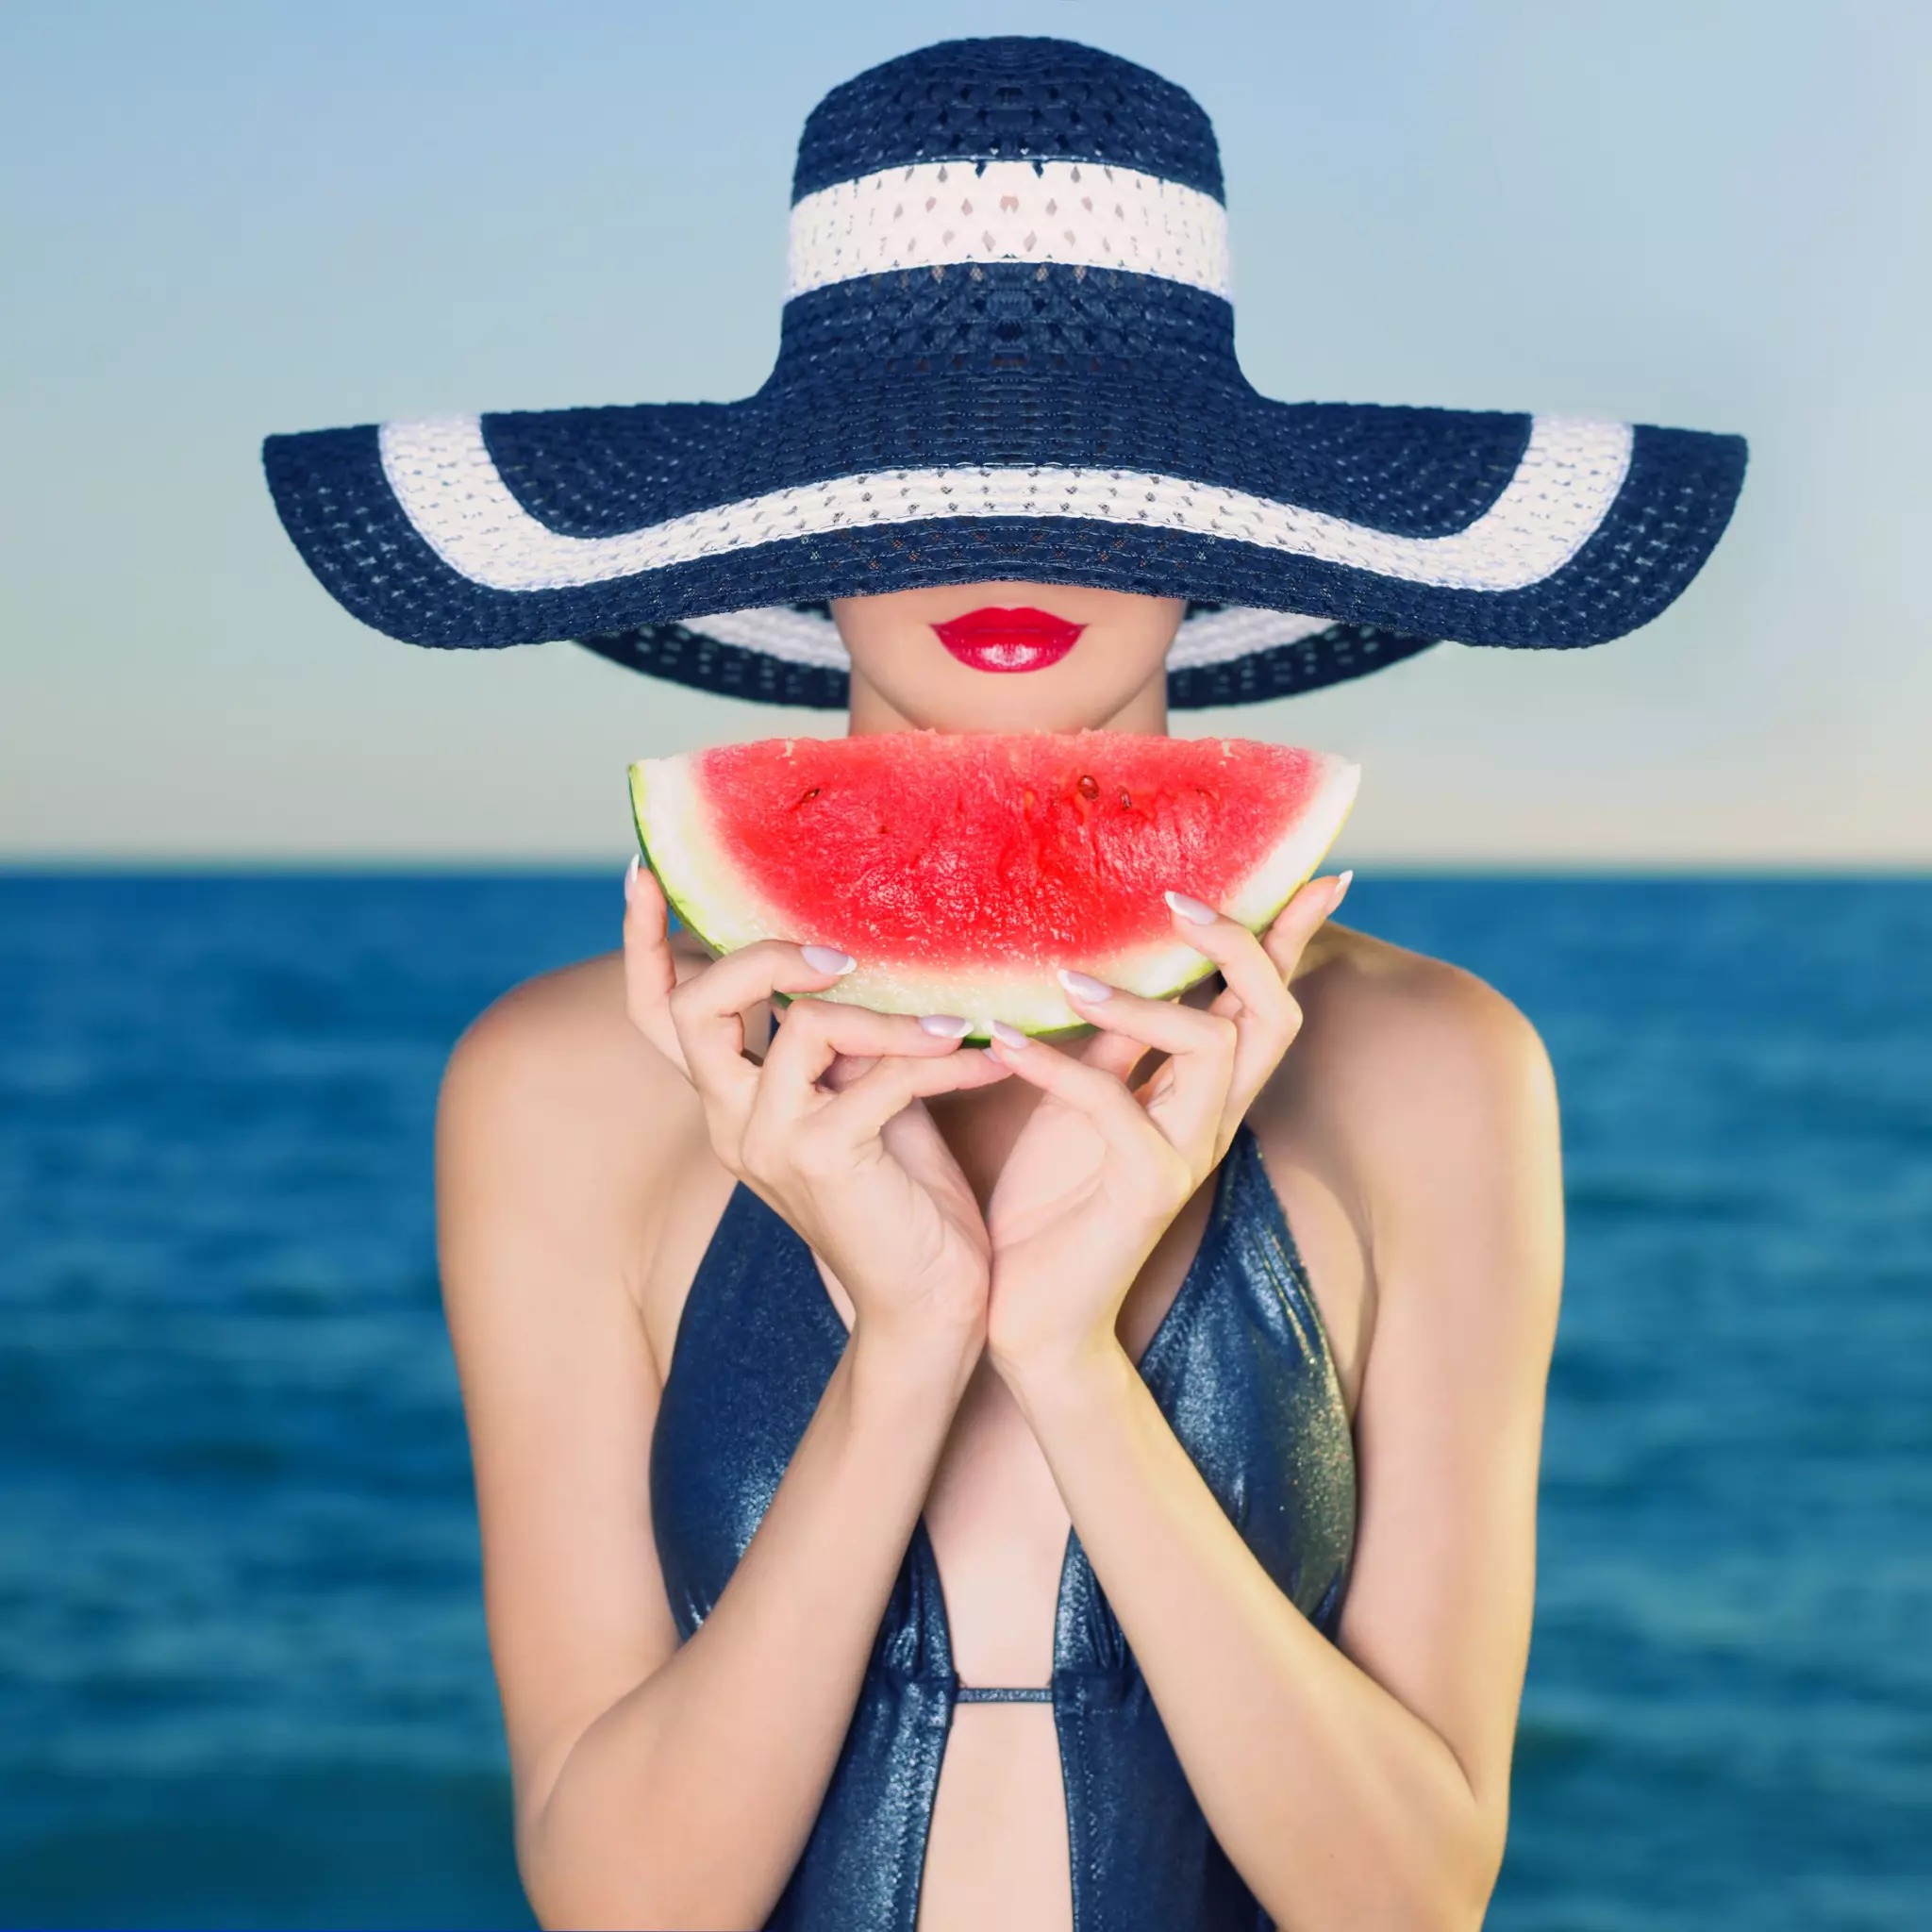 10 Foods to Eat to Stay Hydrated This Summer